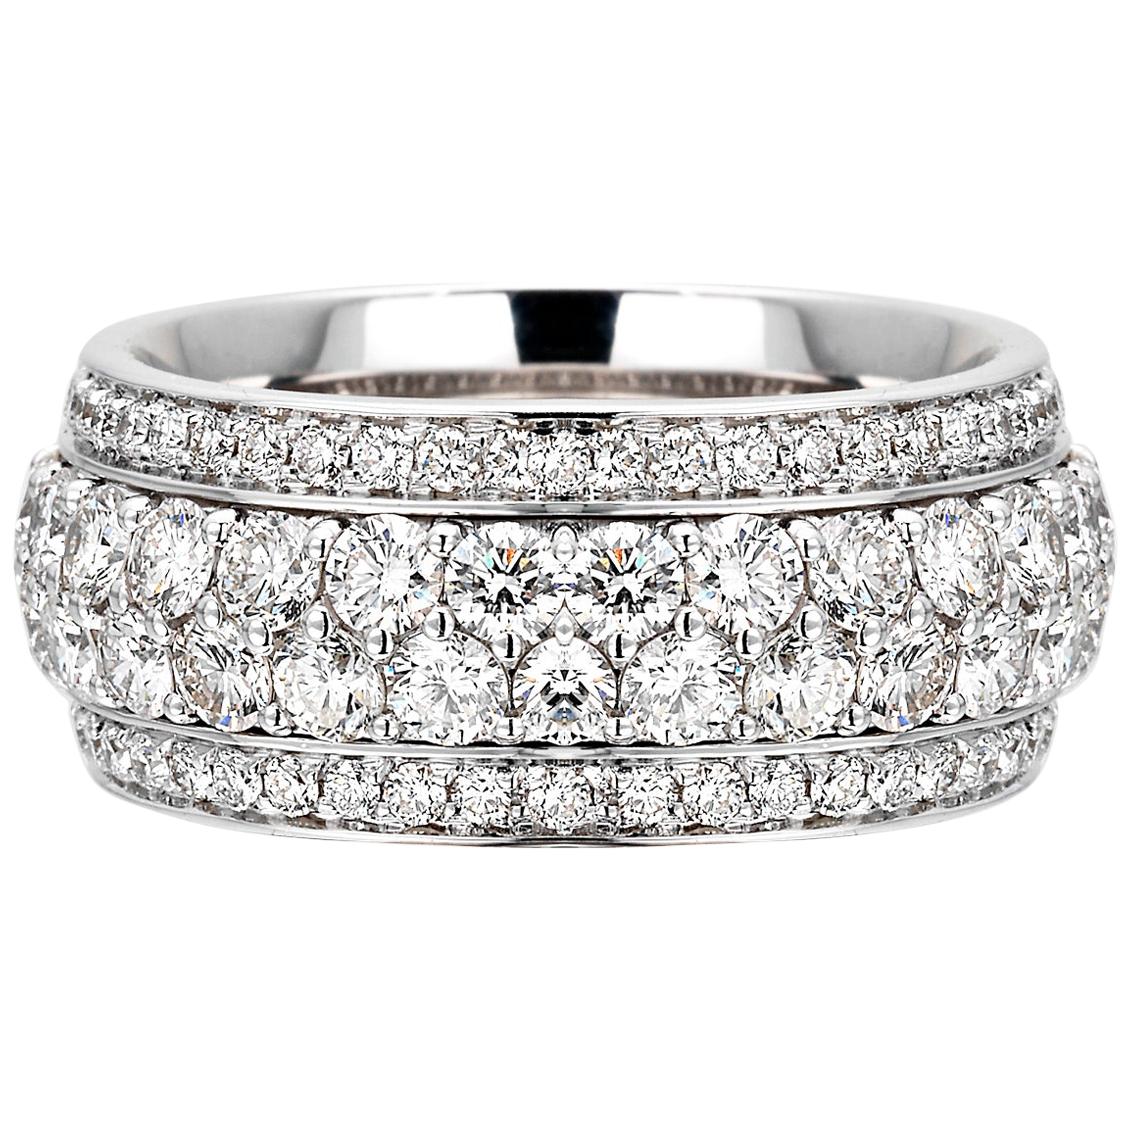 18 Carat White Gold Round Brilliant Cut Diamonds Band Ring For Sale